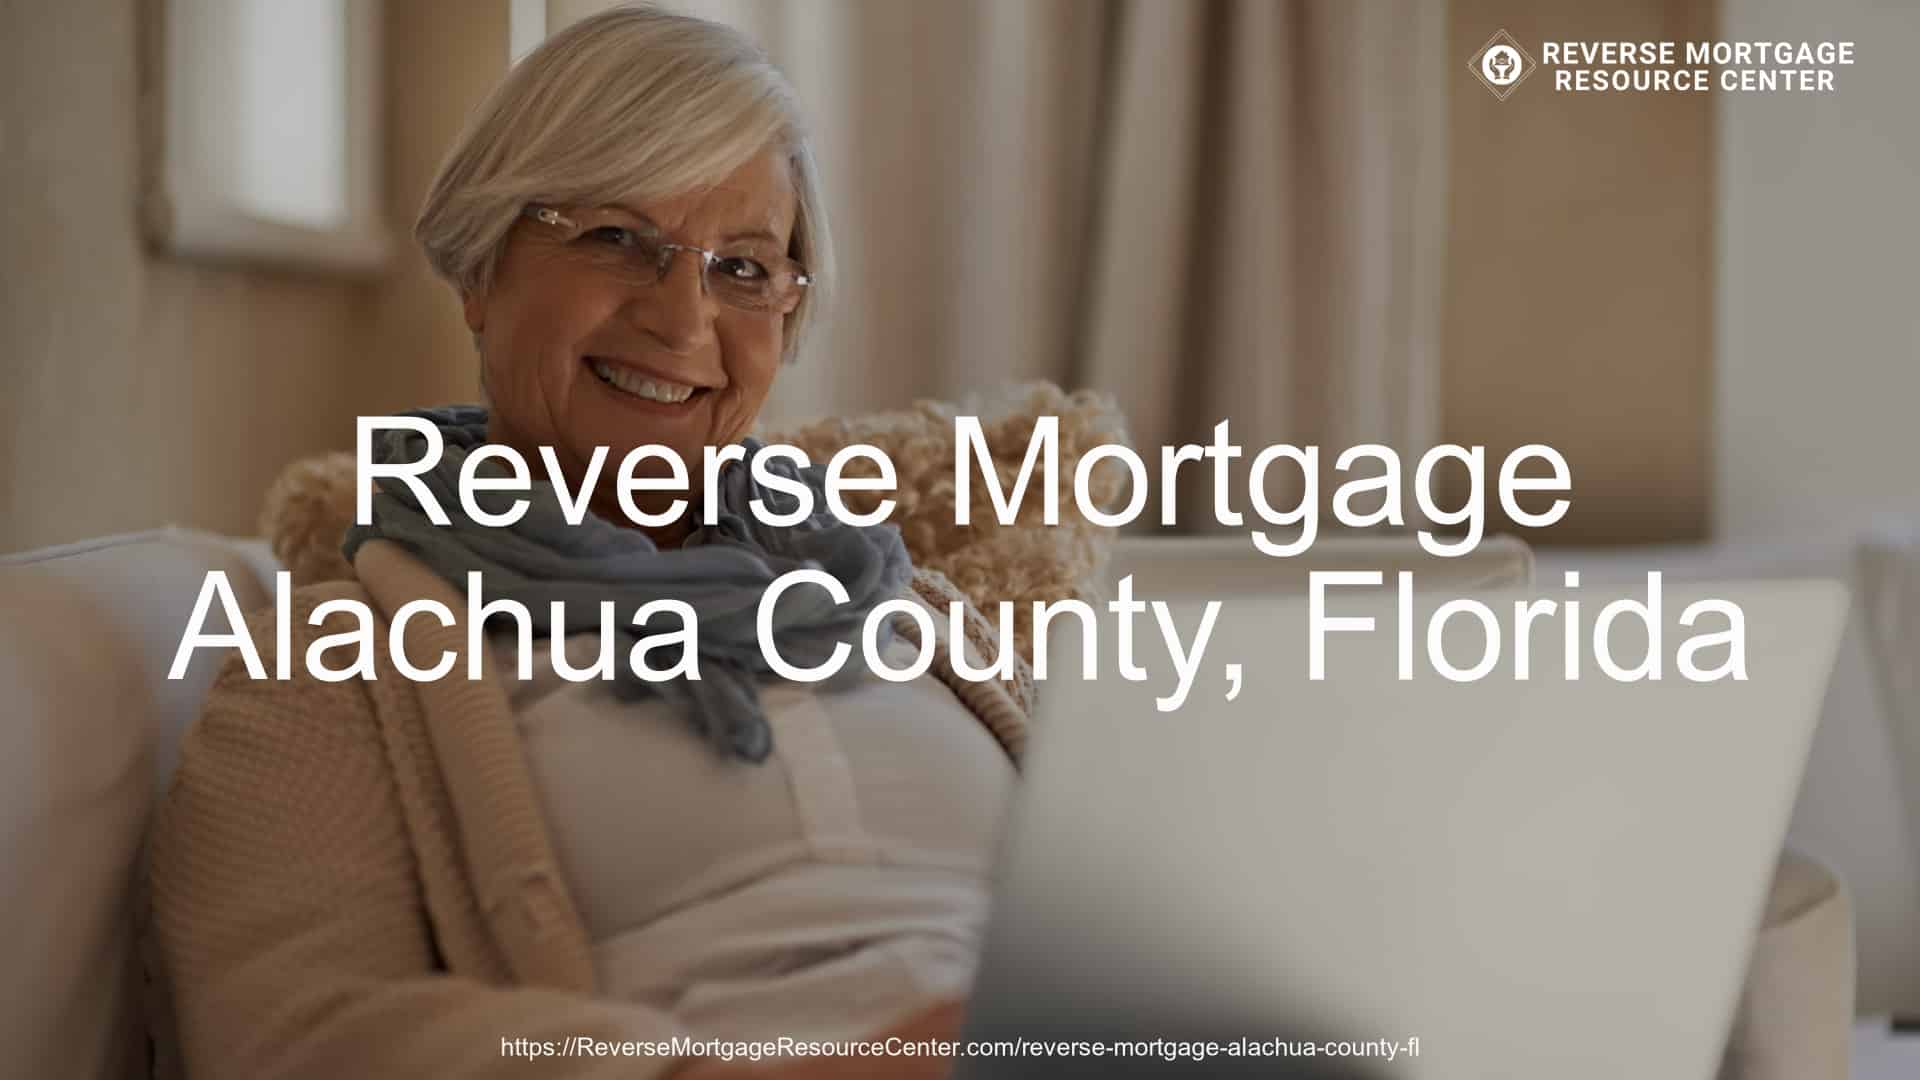 Reverse Mortgage Loans in Alachua County Florida